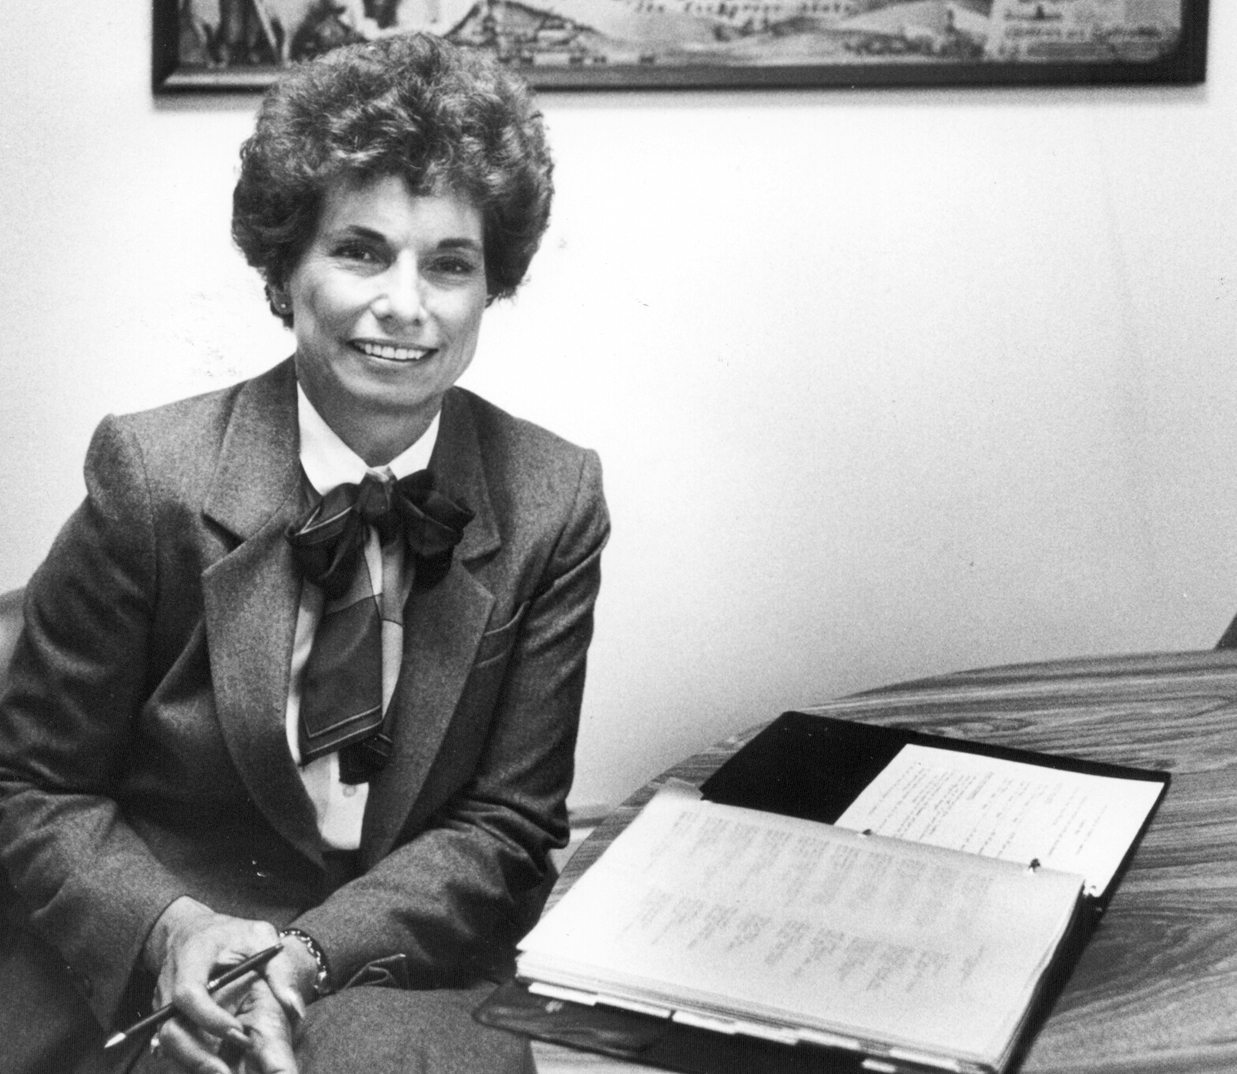 Donna Cantonwine at the Vancouver Chamber of Commerce - since renamed the Greater Vancouver Chamber of Commerce - in a 1986 portrait.